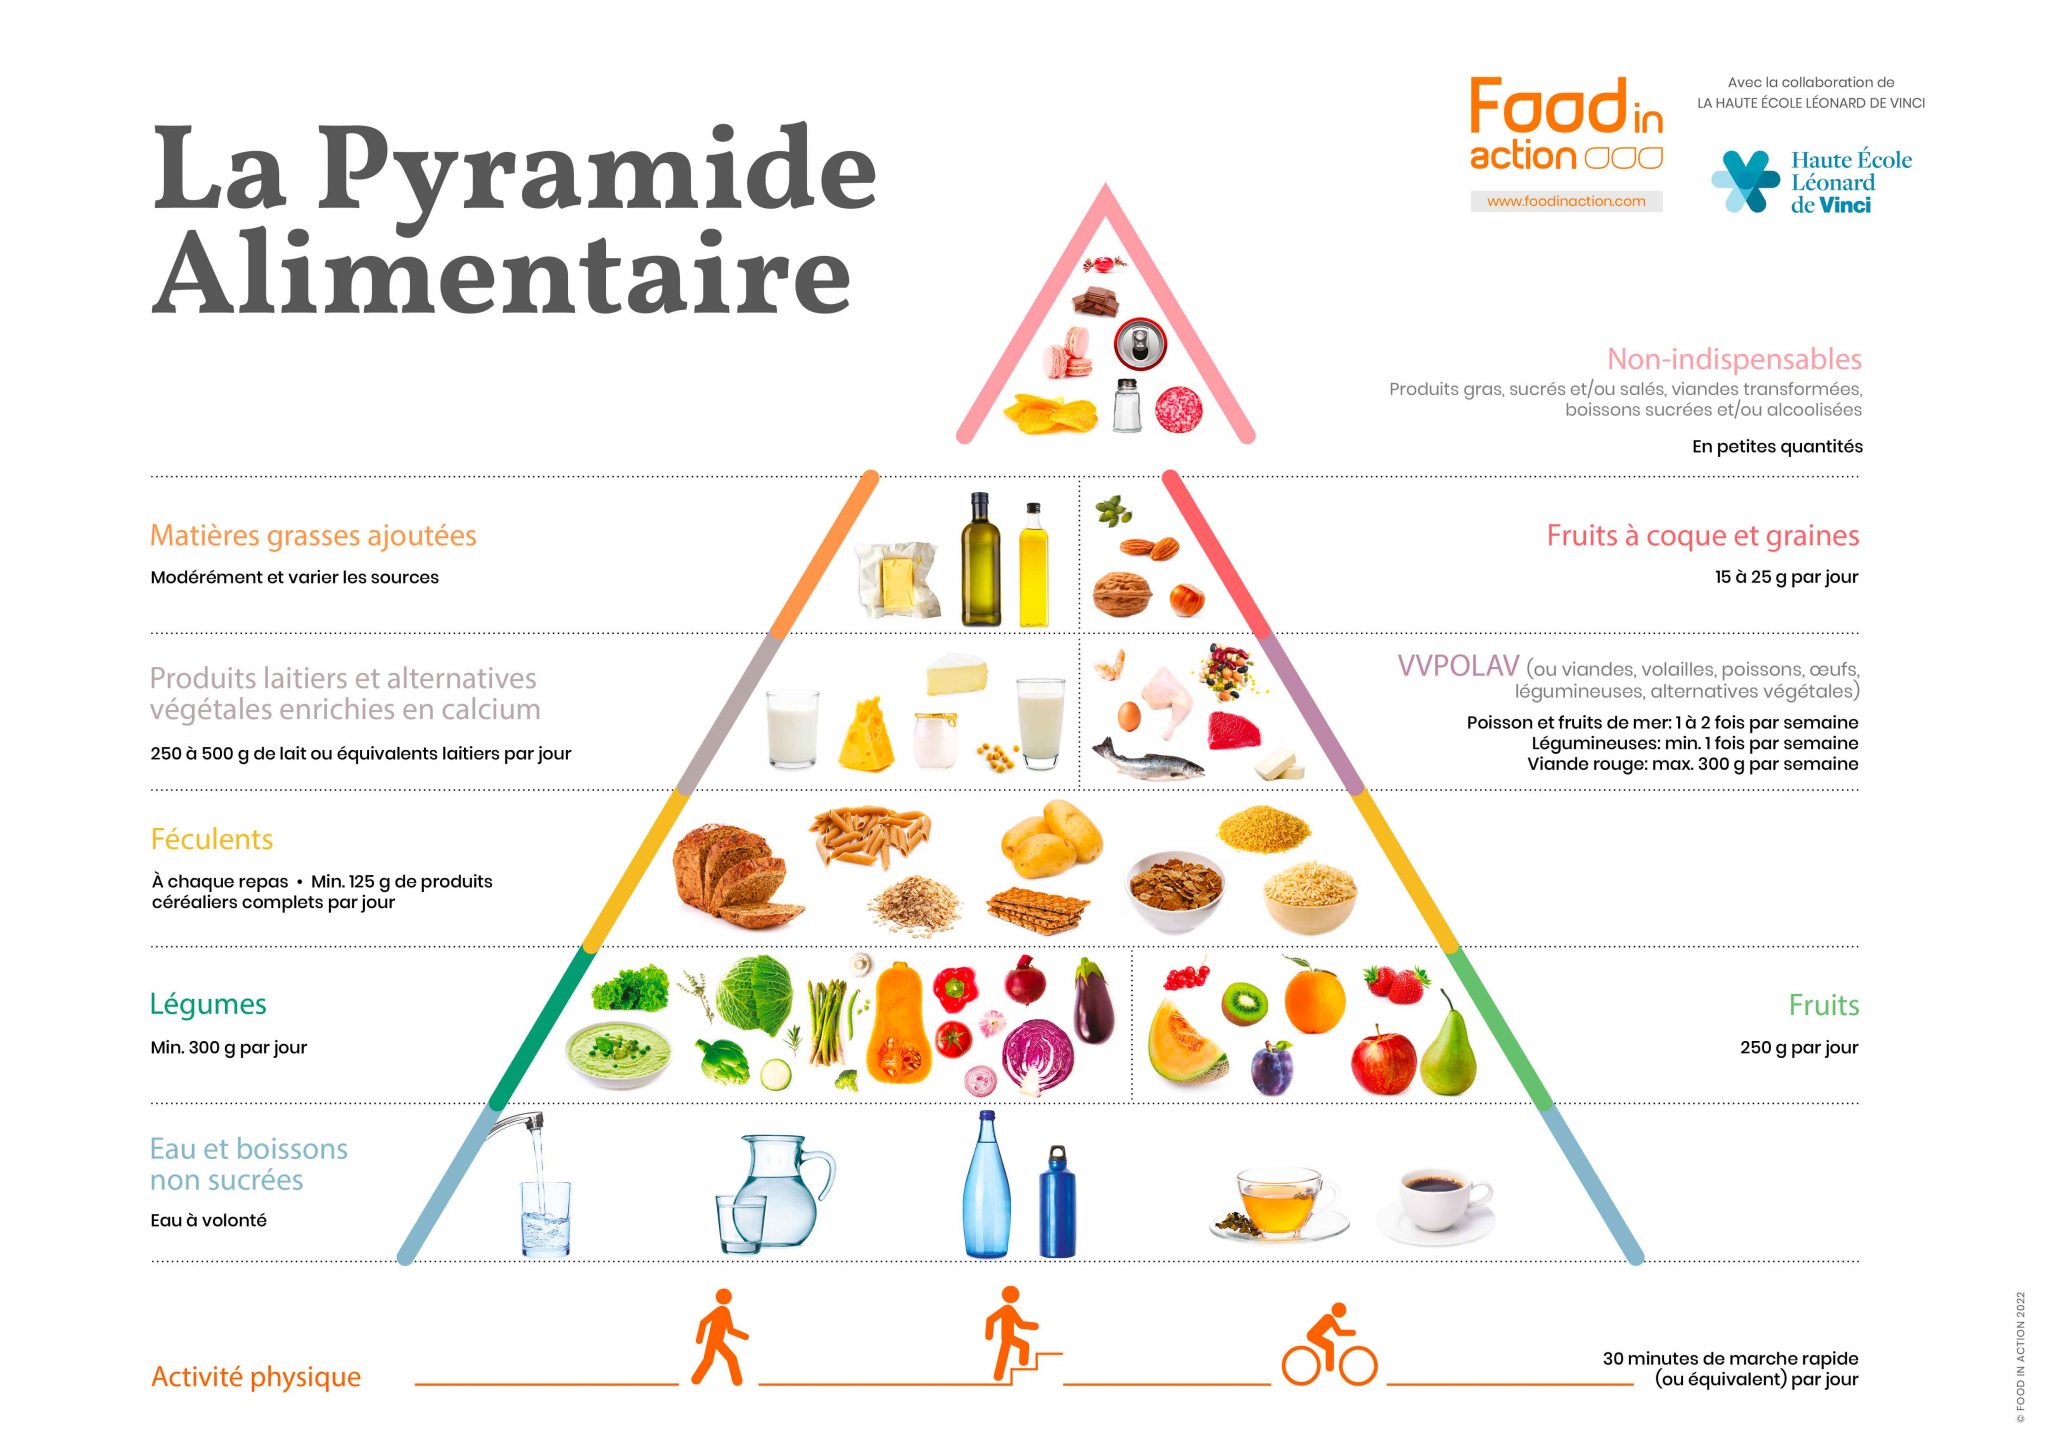 food-pyramid-2020-families-food-recommendations-2048x1448.jpg